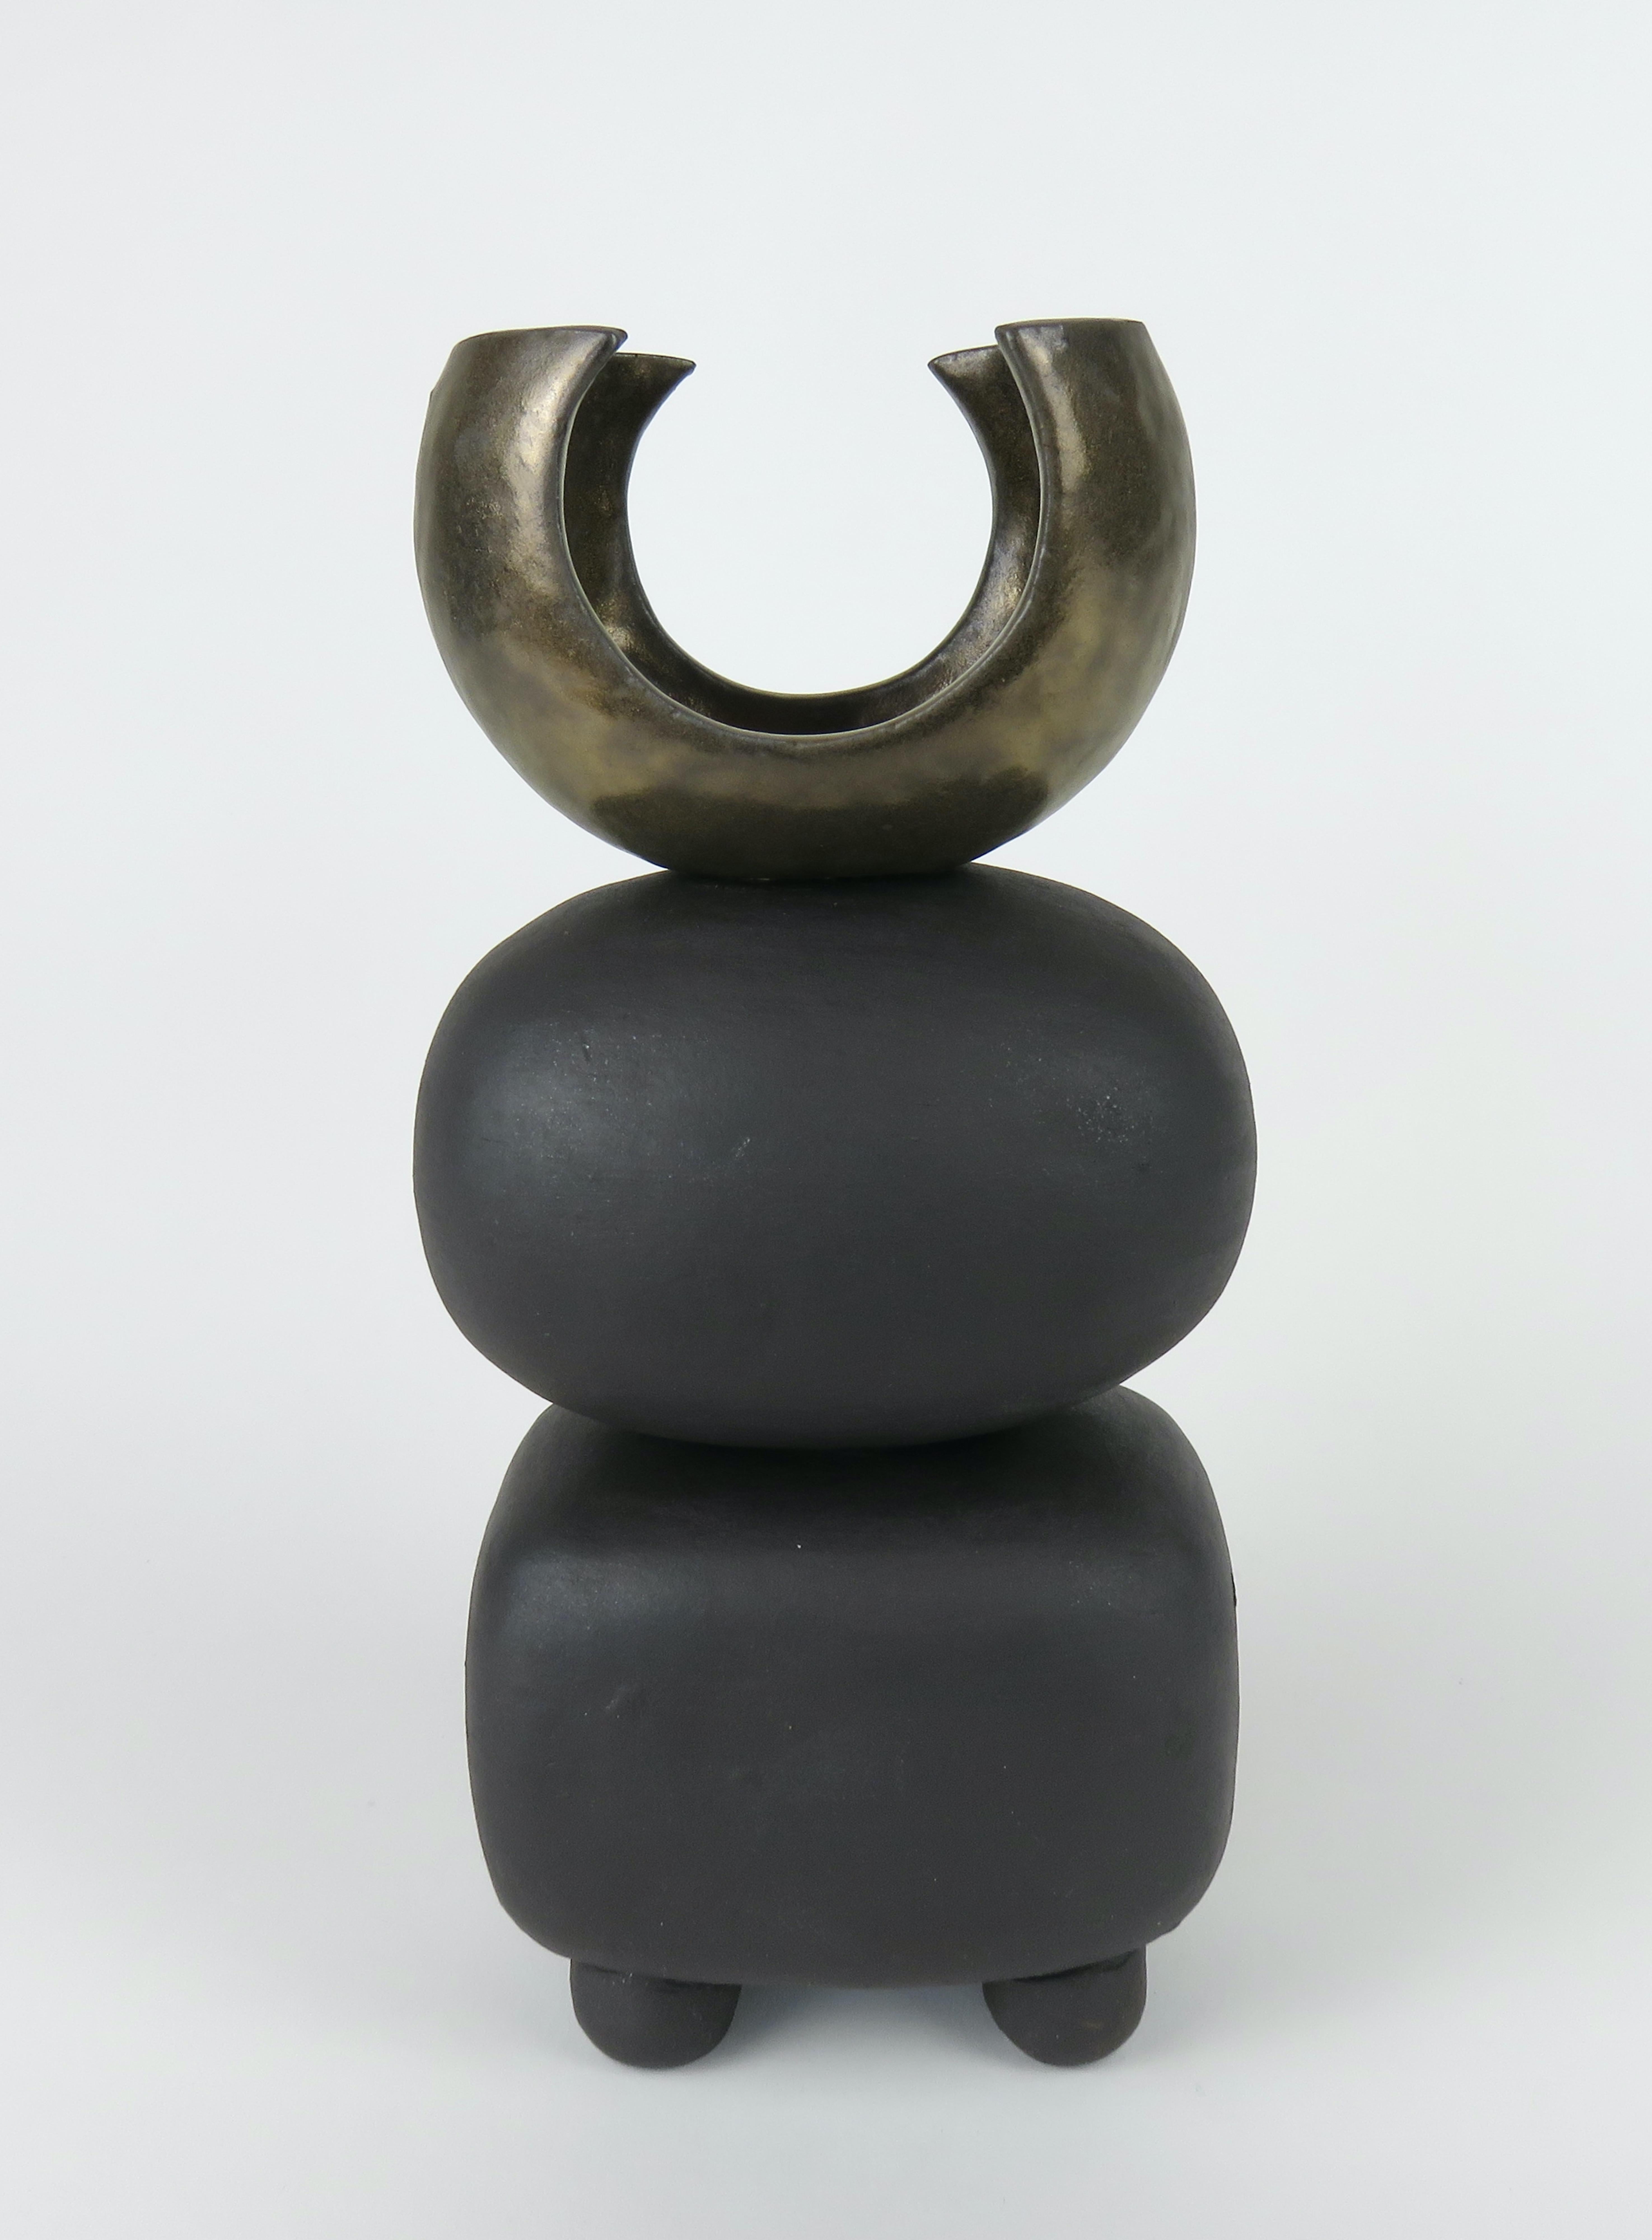 One in a new series of Modern TOTEMS consisting of soft round or rectangular forms on small conical feet. The shapes begin as a solid piece. They are then hollowed out, stacked and the feet attached. The top of this one is a large curved shape, like